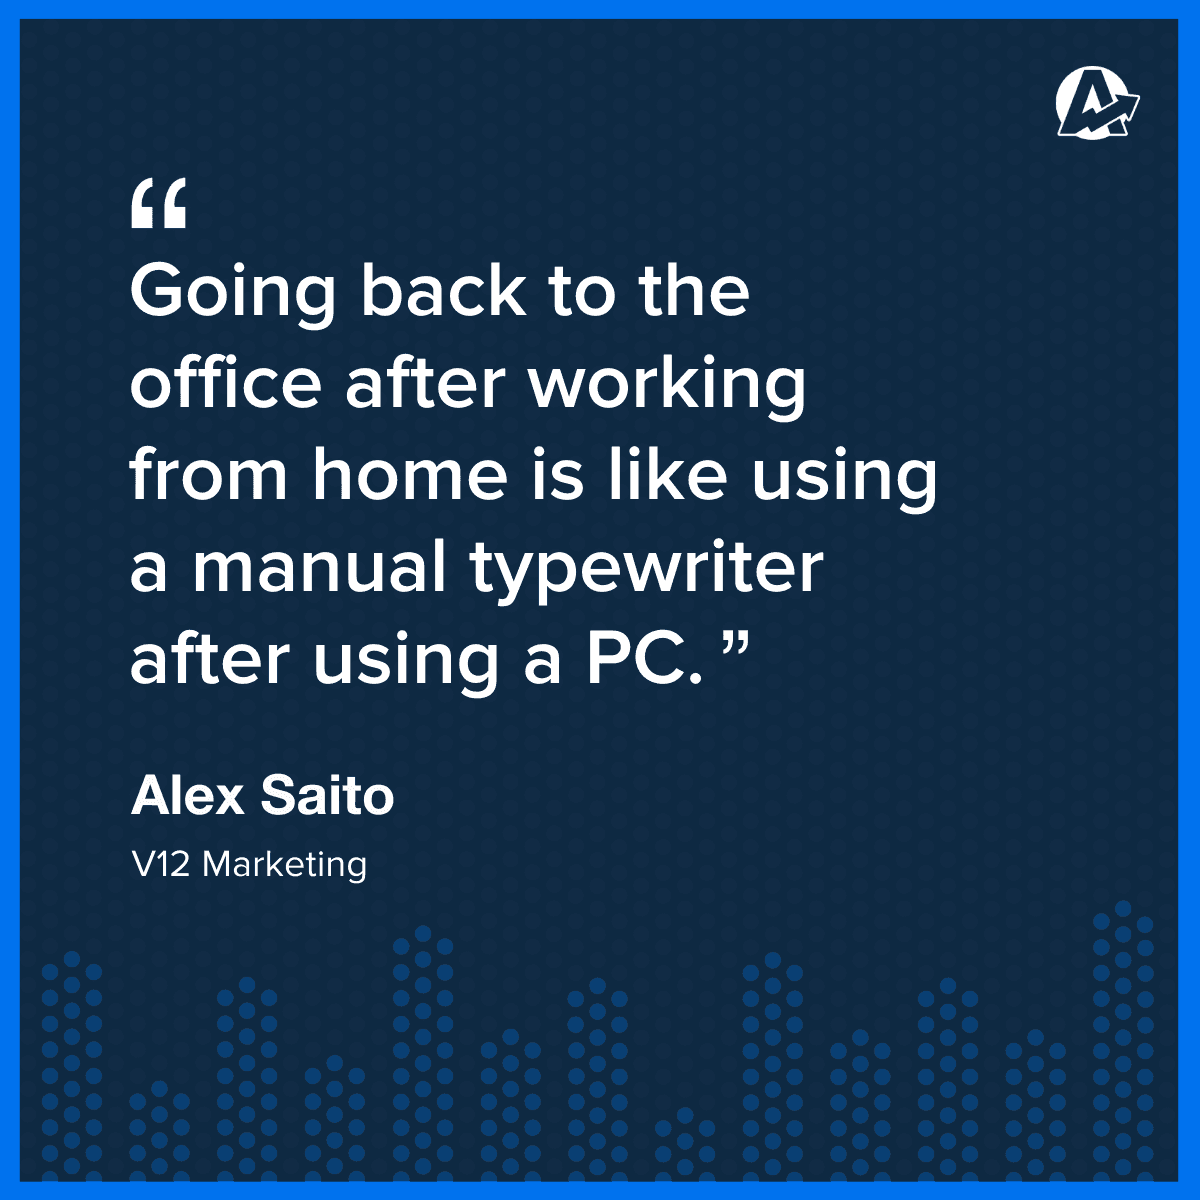 quote about going back to the office after working from home will be like using a manual typewriter after using a PC